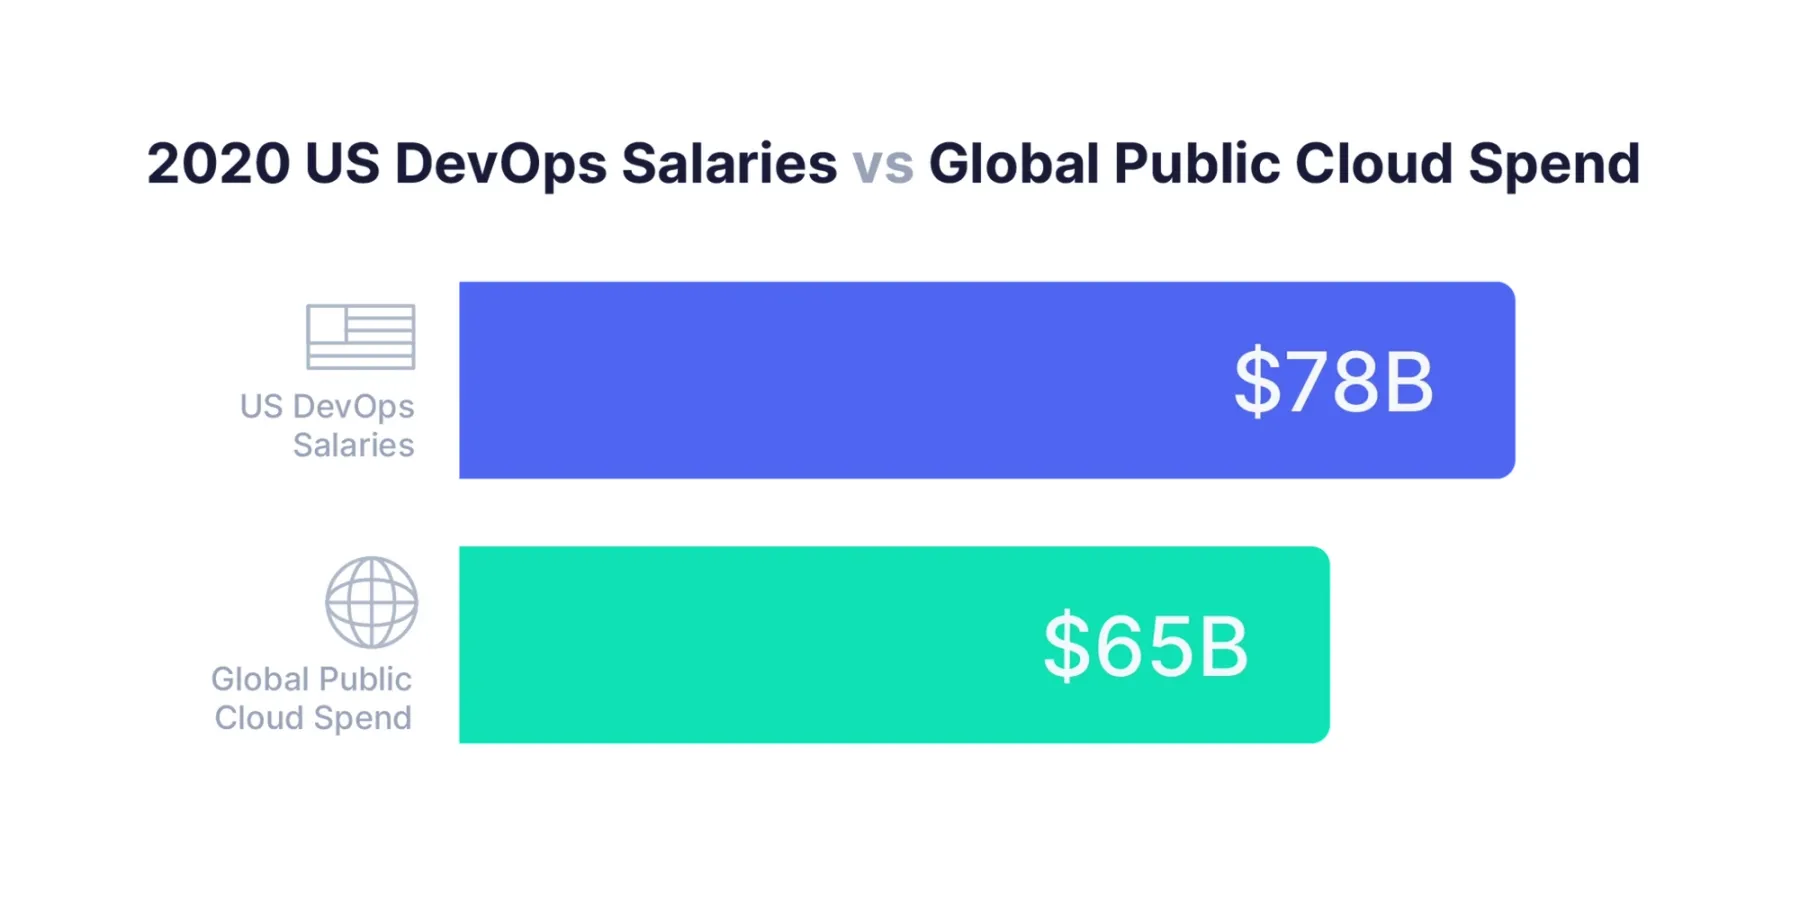 DevOps engineers cost much more than the cloud providers they manage.